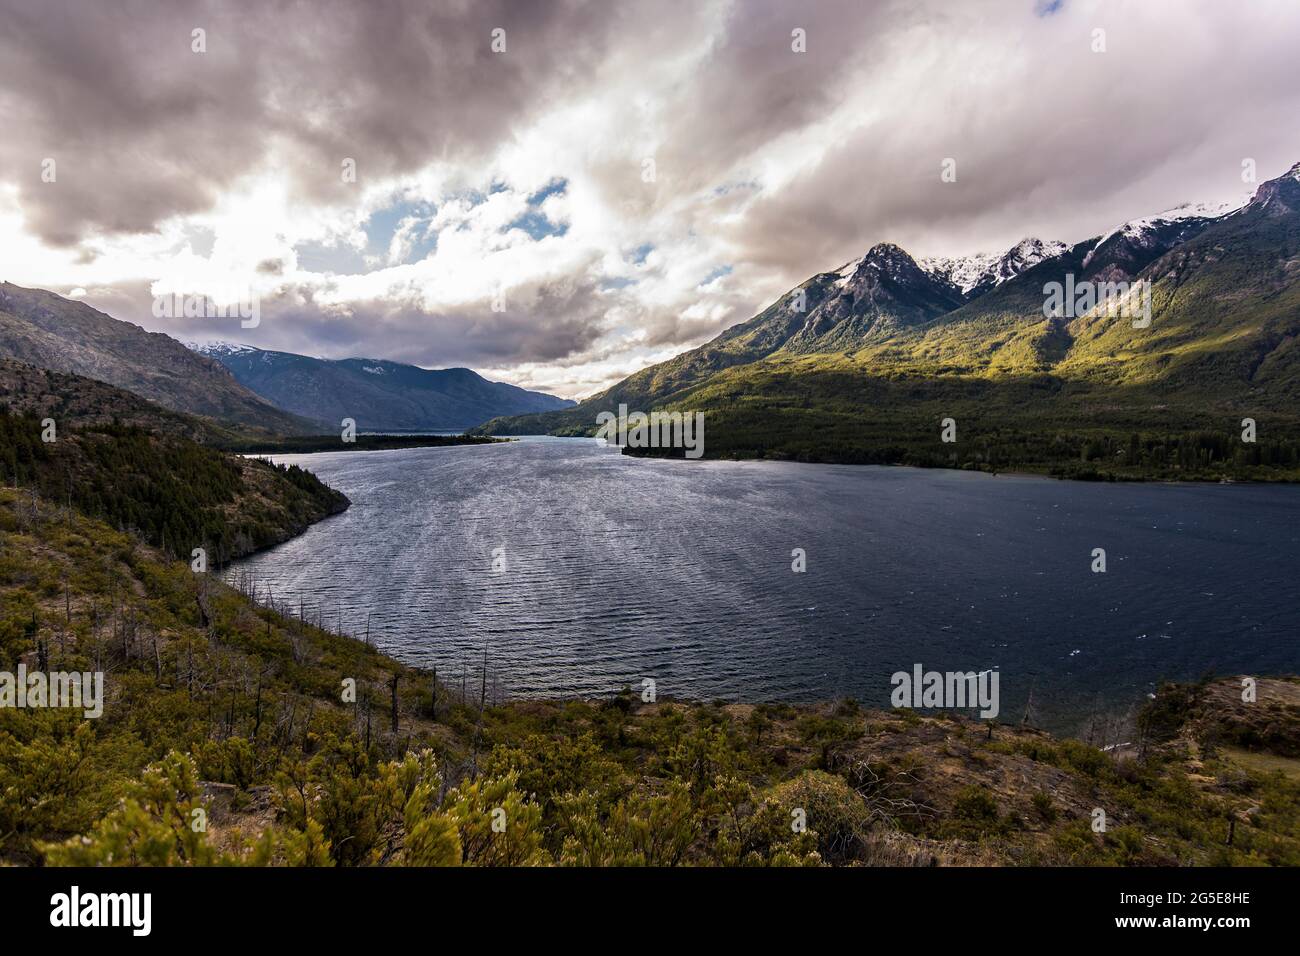 Expressive landscape in Epuyén Lake, Lago Puelo National Park, Patagonia Argentina. Stock Photo